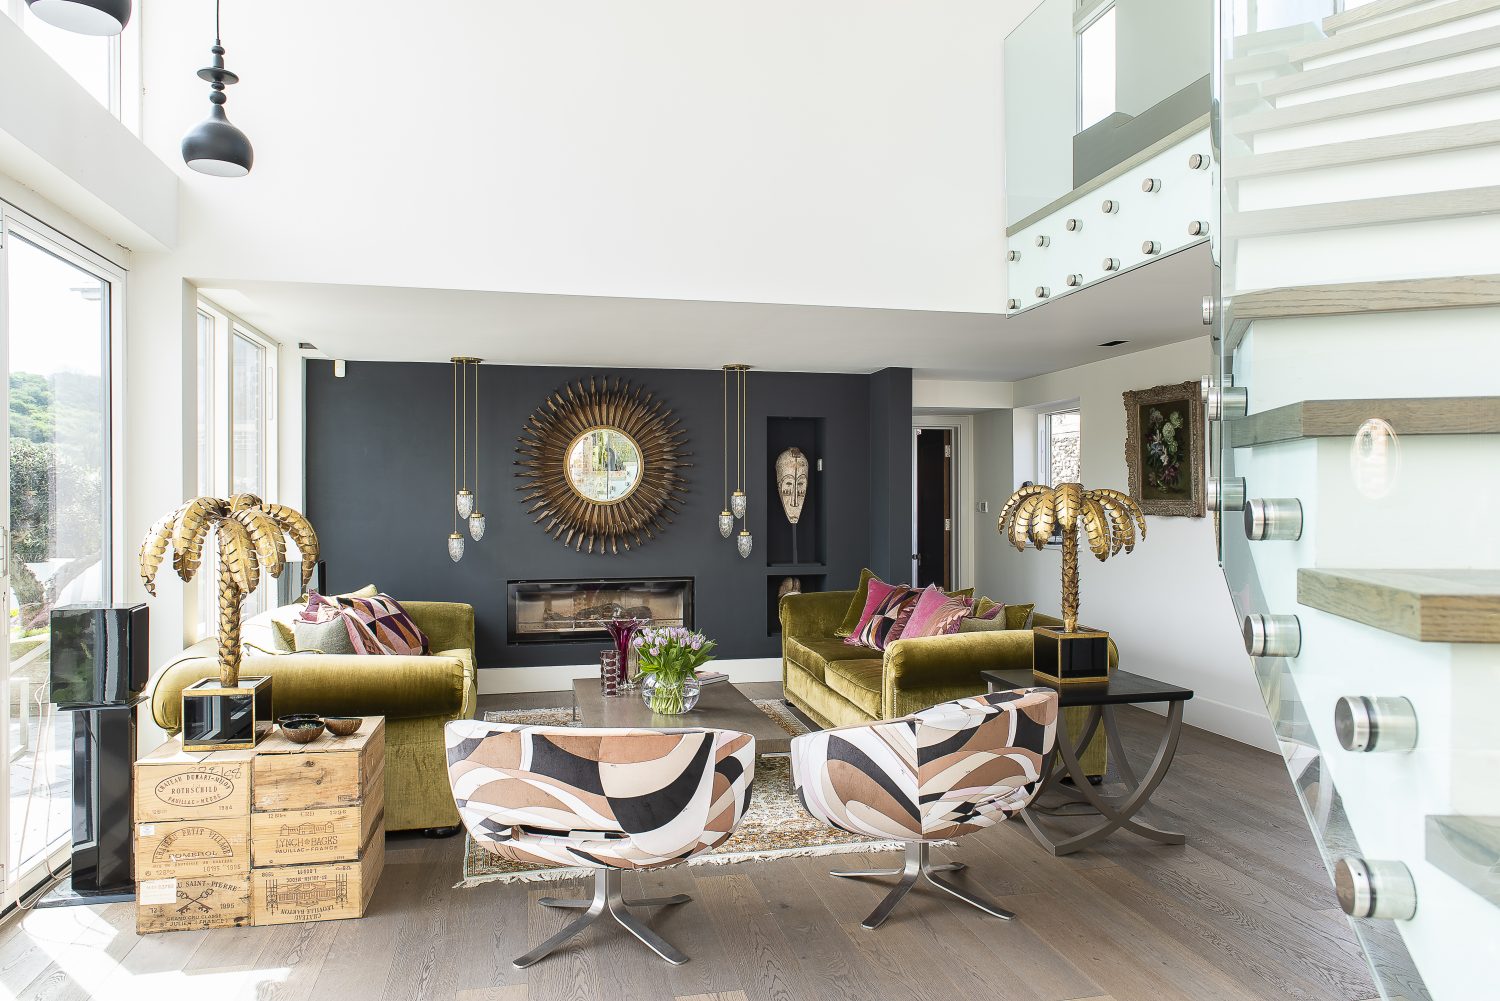 The bright and airy sitting room is home to a pair of 1960s Cappellini swivel chairs covered in original Pucci fabric. The oversized brass pineapple lamps date from the 1950s and the velvet sofas are from the Pfeiffer Design range, which they have made in their own workshop in Eastbourne